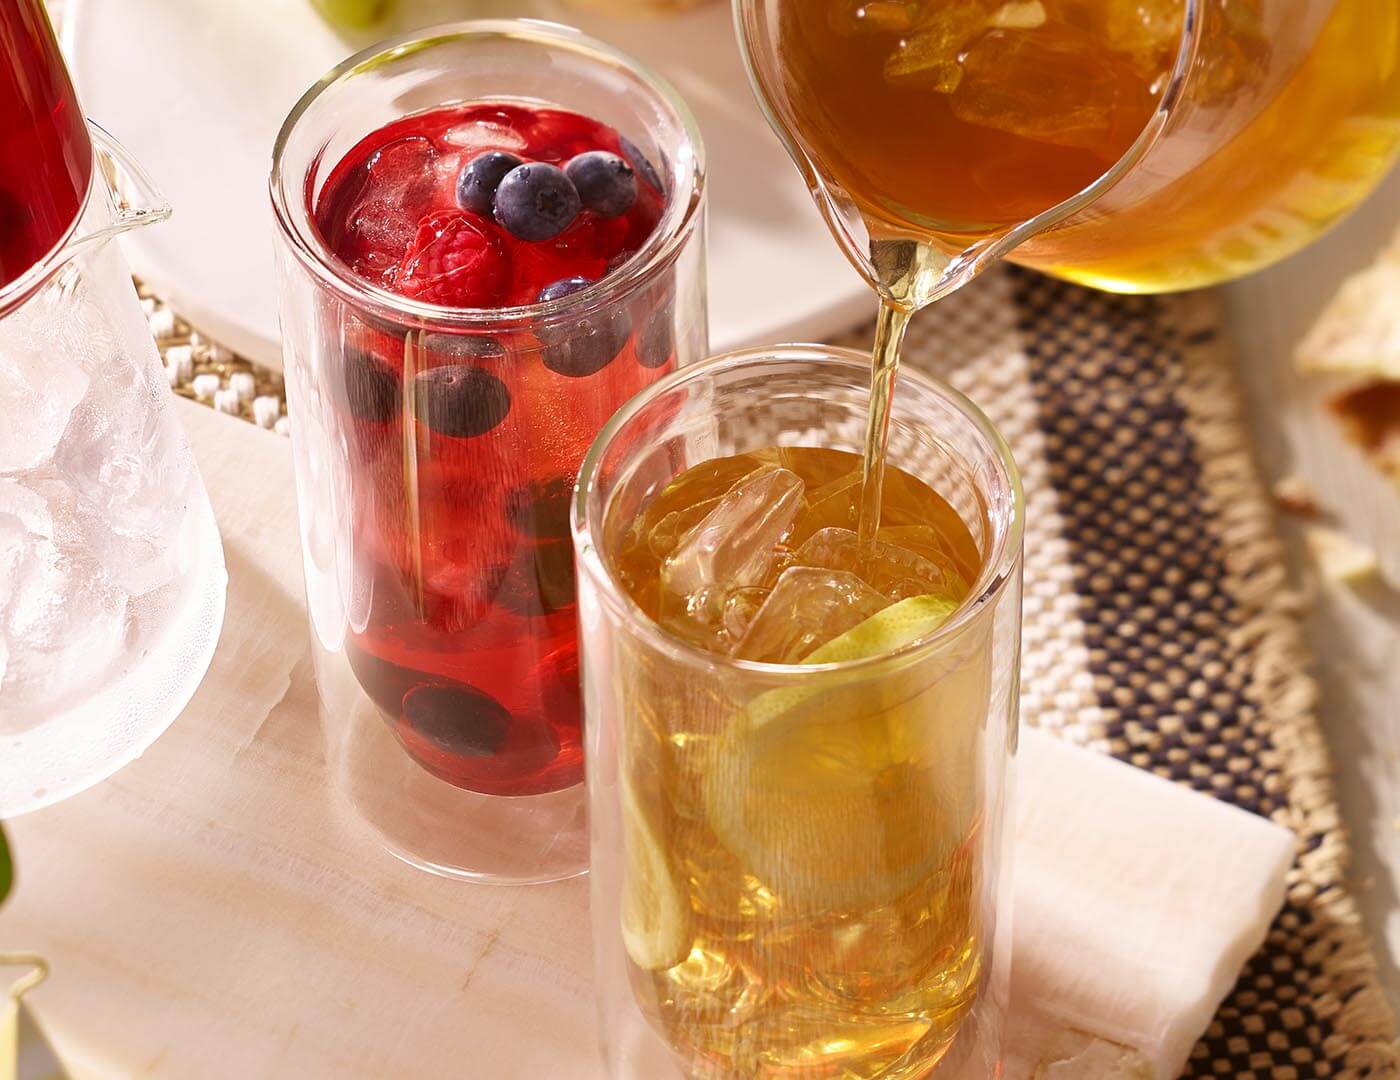 Filling double-walled glasses with iced tea